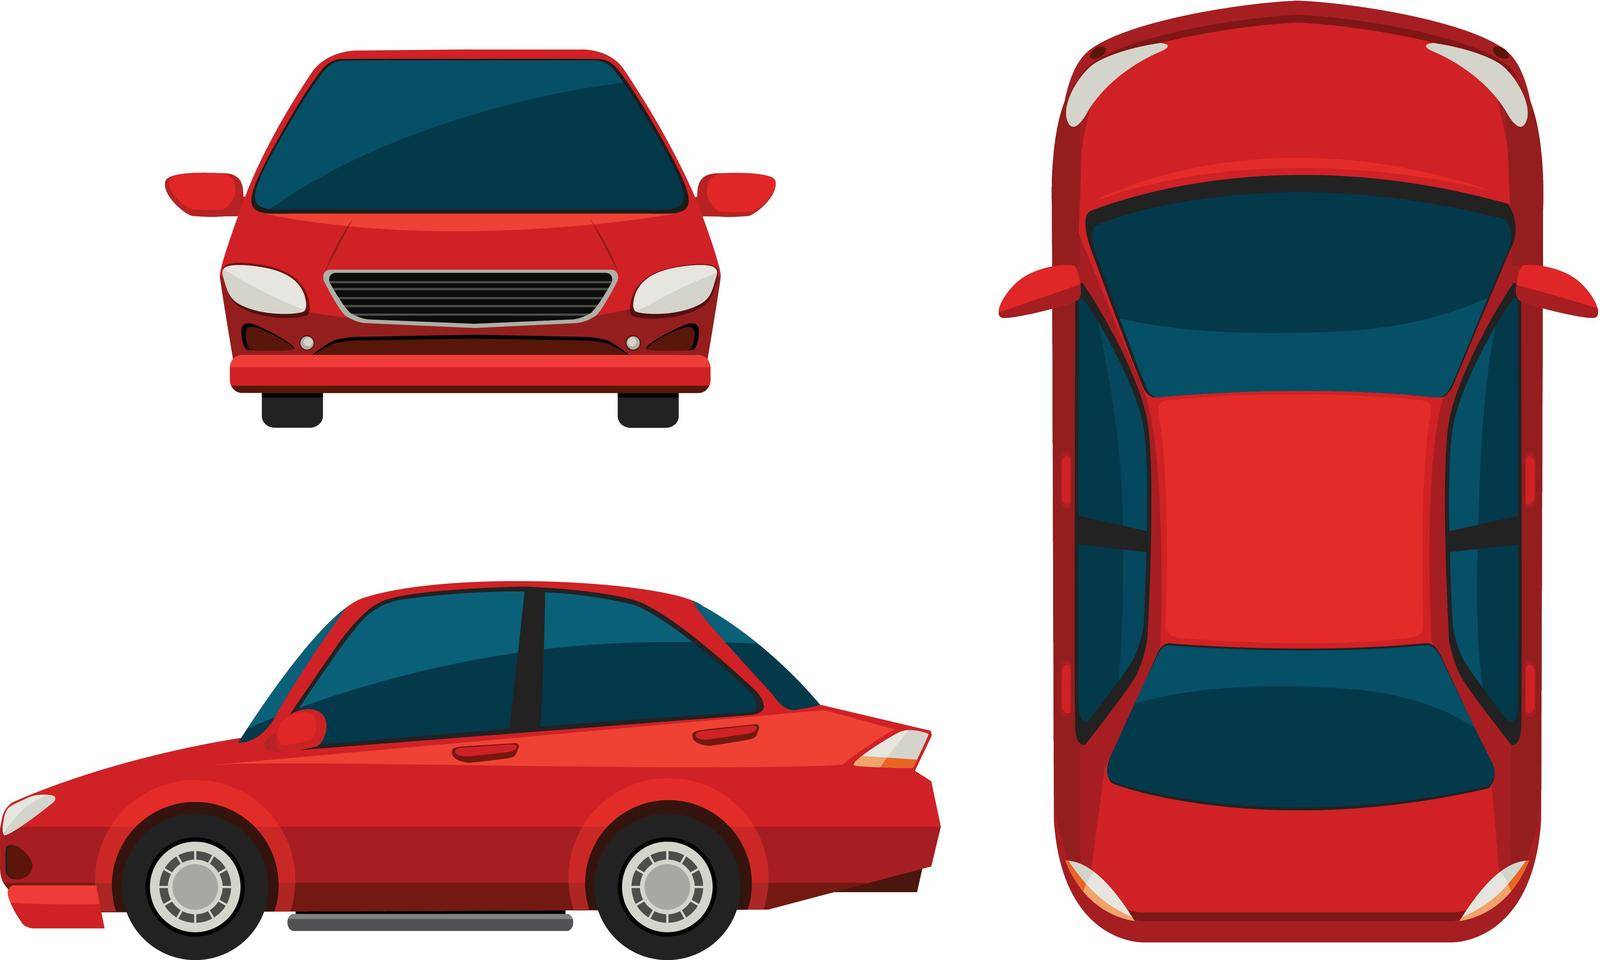 Illustration of different view of a red car